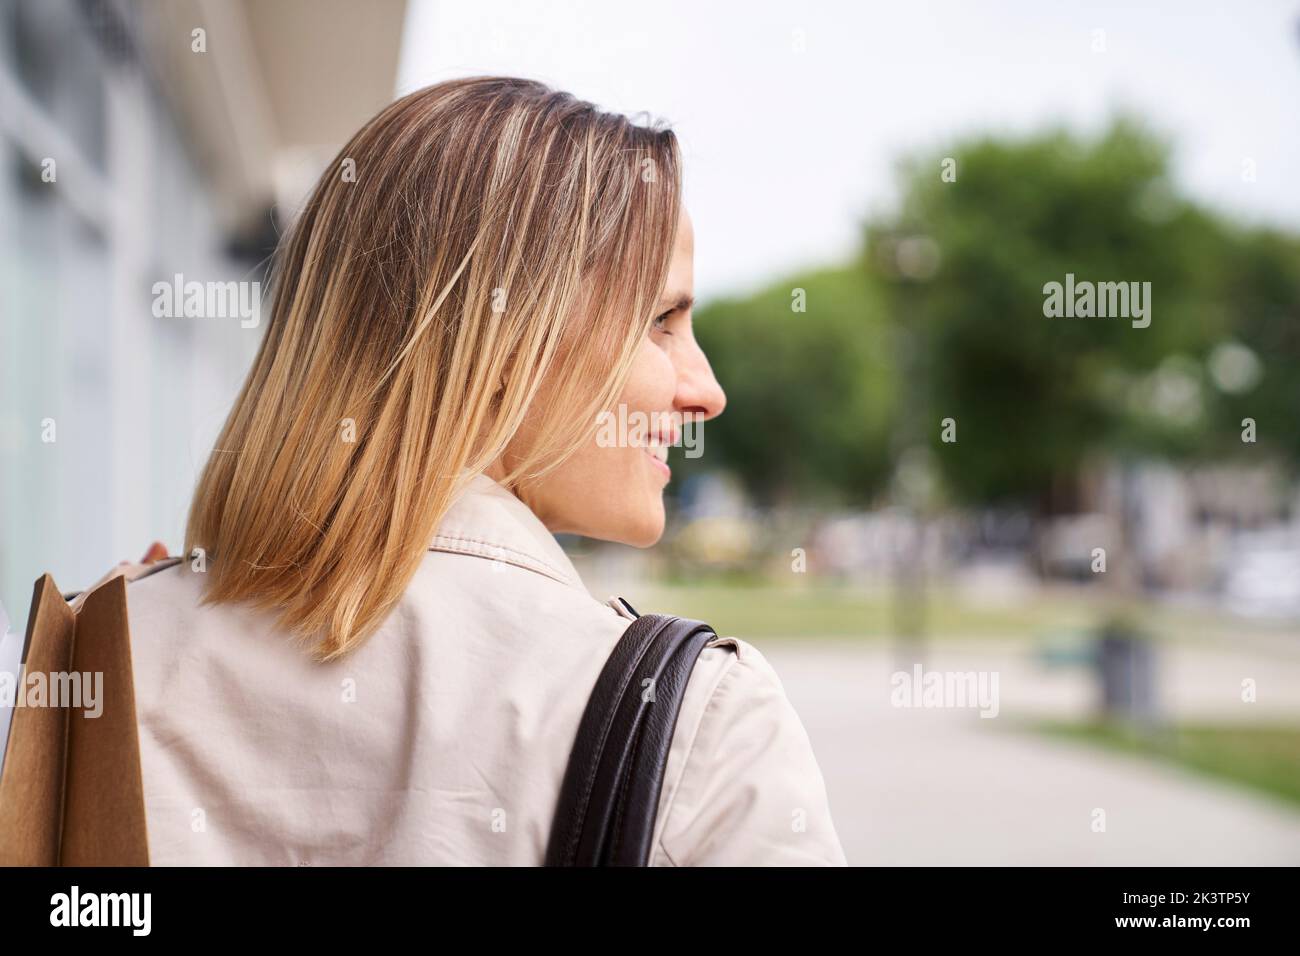 Mid-shot sideview of woman's face walking in the street Stock Photo